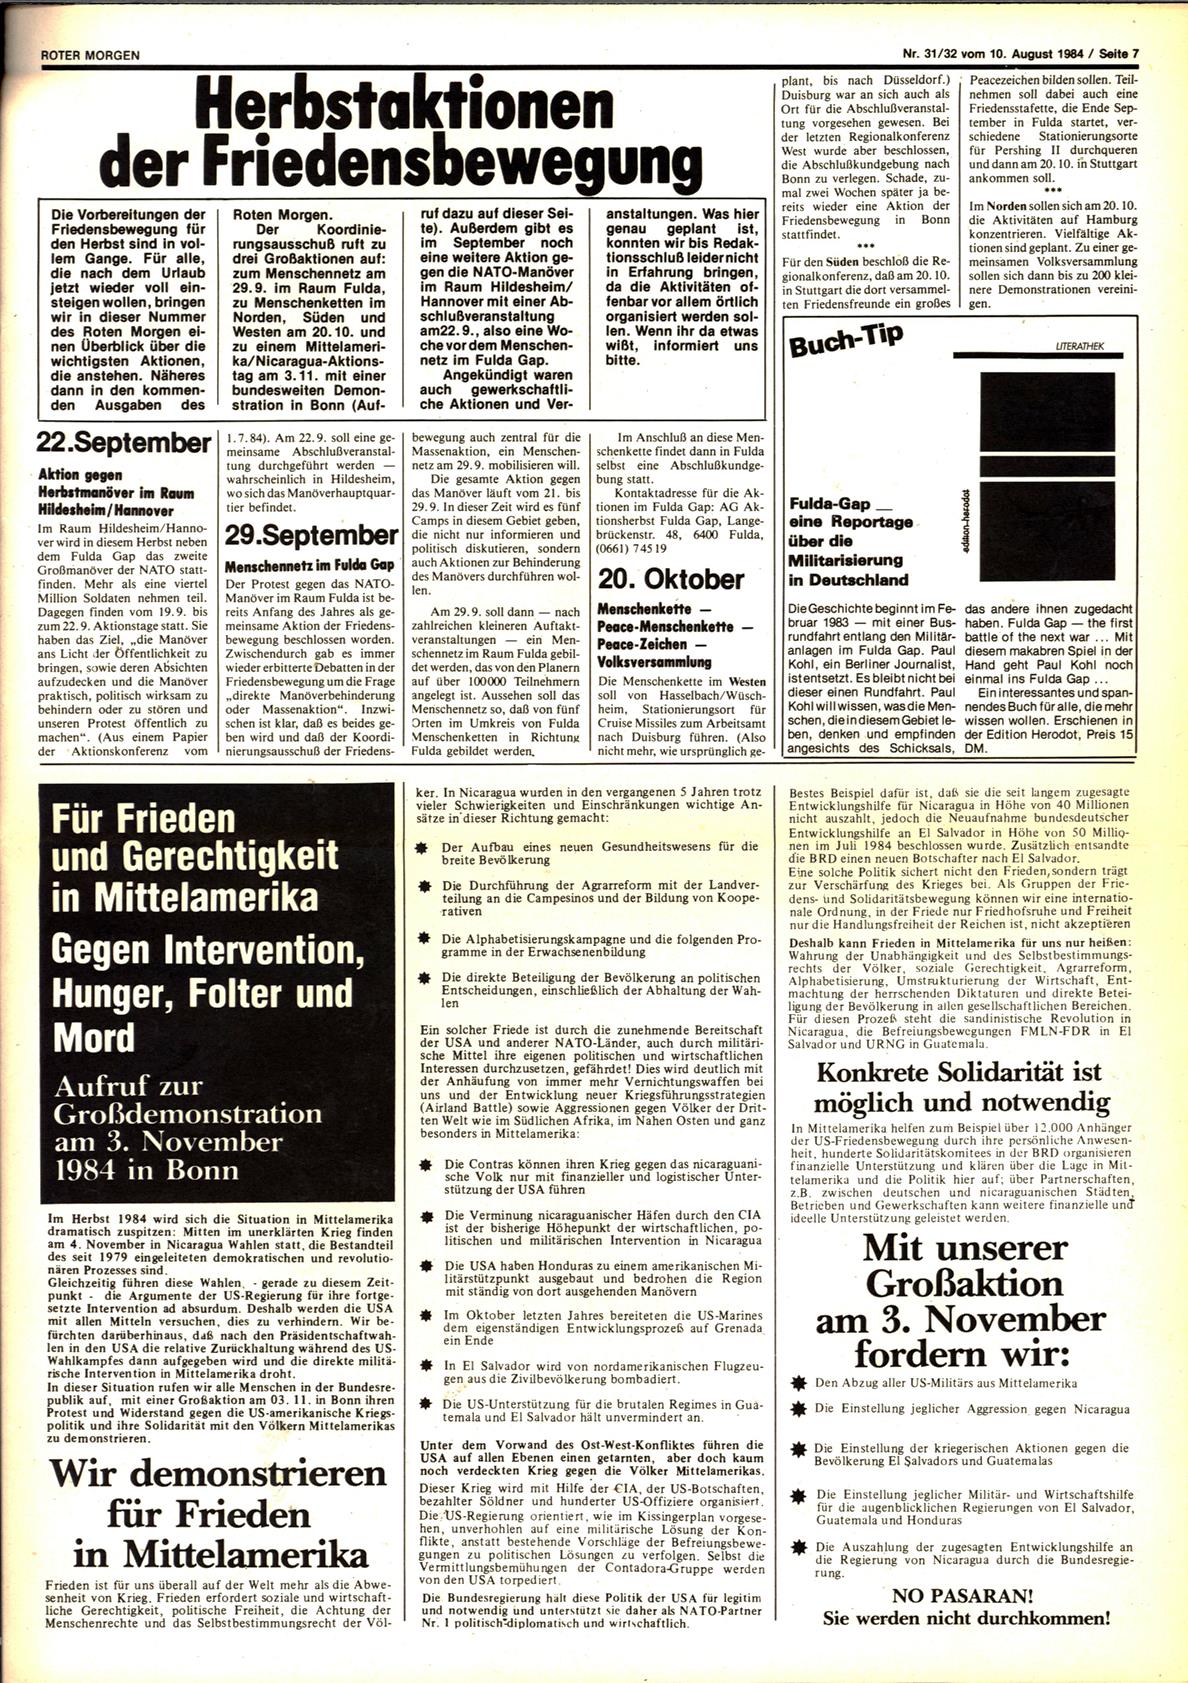 Roter Morgen, 18. Jg., 10. August 1984, Nr. 31/32, Seite 7